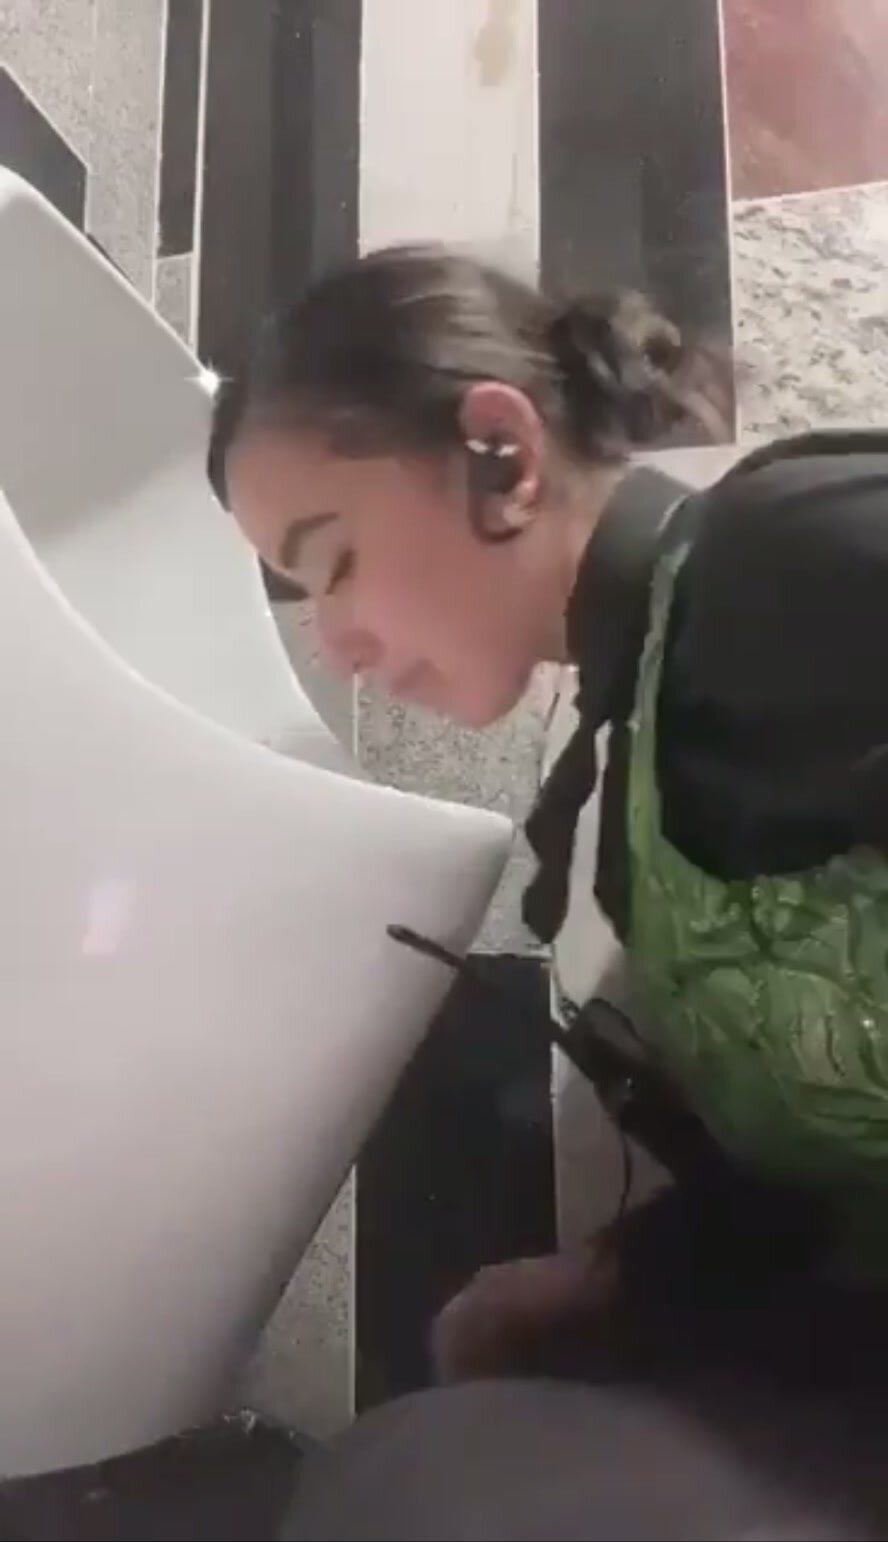 Security guard cleaning the urinal